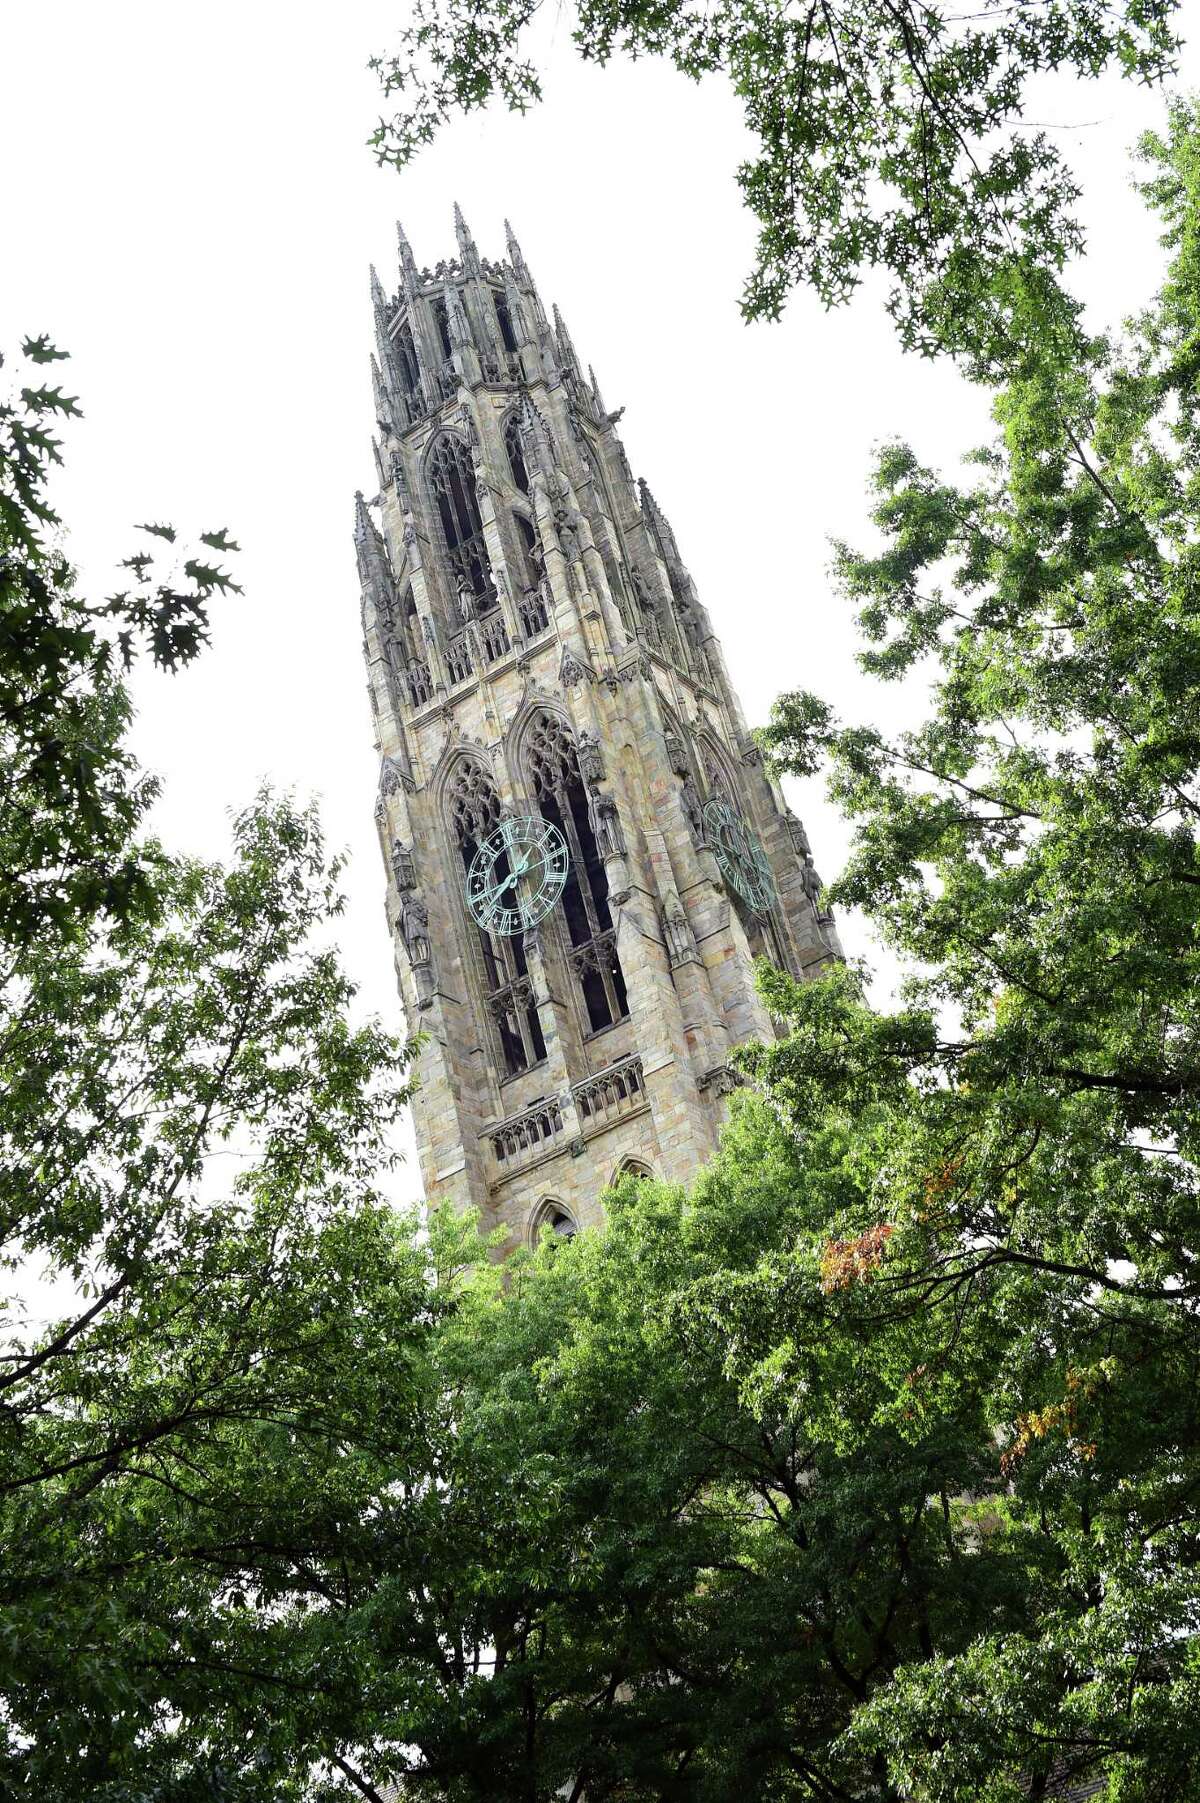 Harkness Tower at Yale University in New Haven.